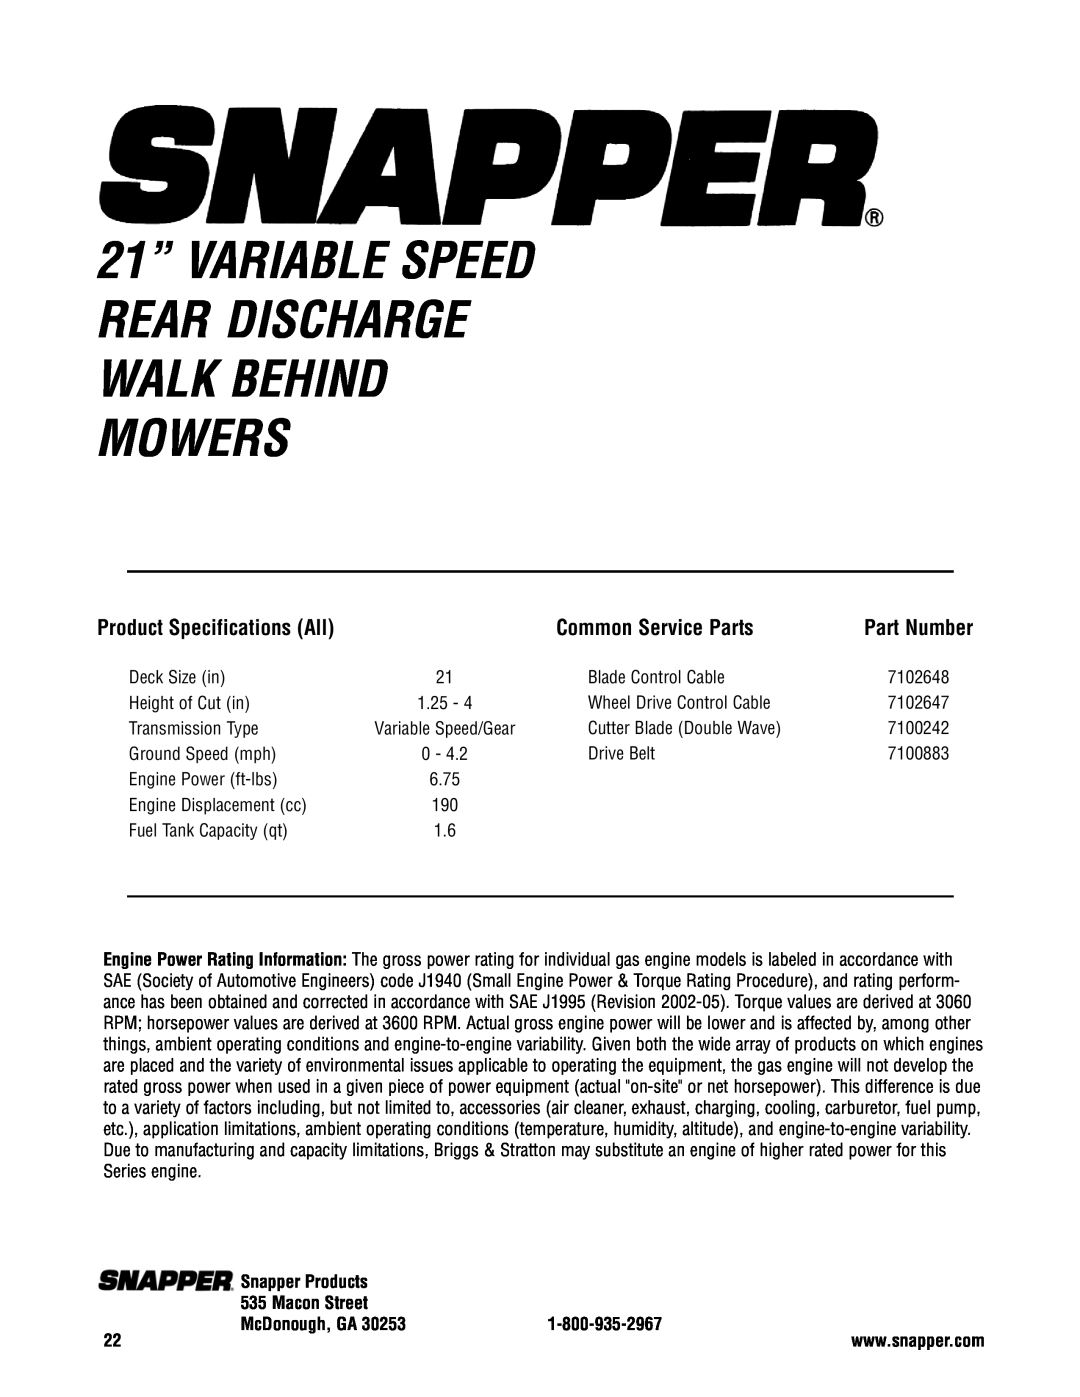 Briggs & Stratton NSPVH21675 specifications Part Number, Snapper Products, Macon Street, McDonough, GA 